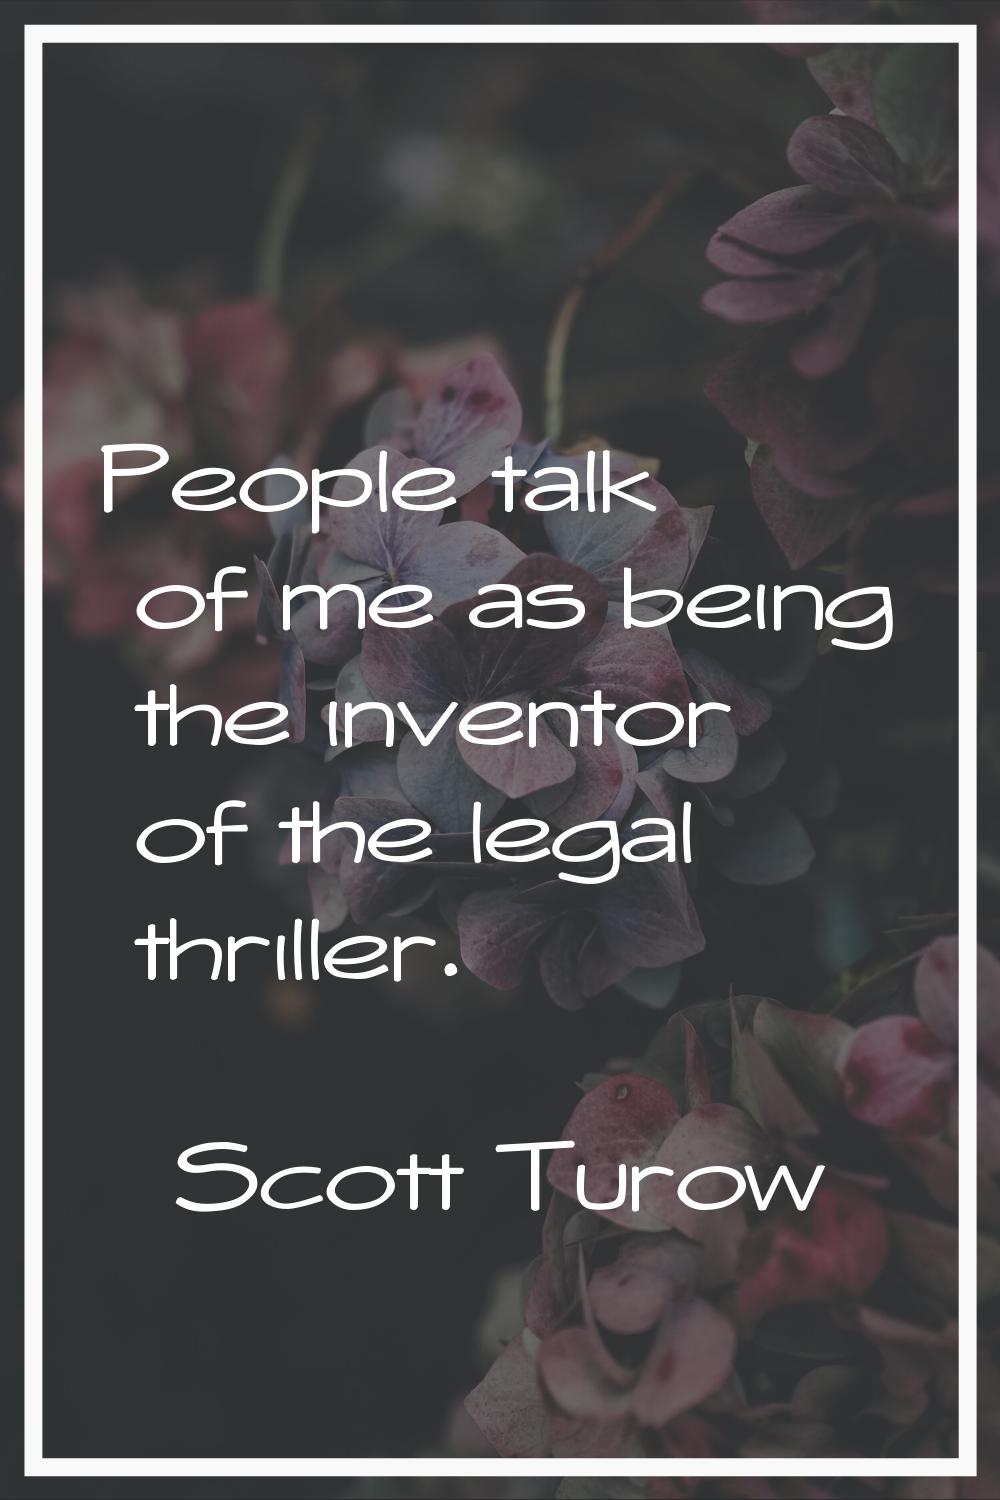 People talk of me as being the inventor of the legal thriller.